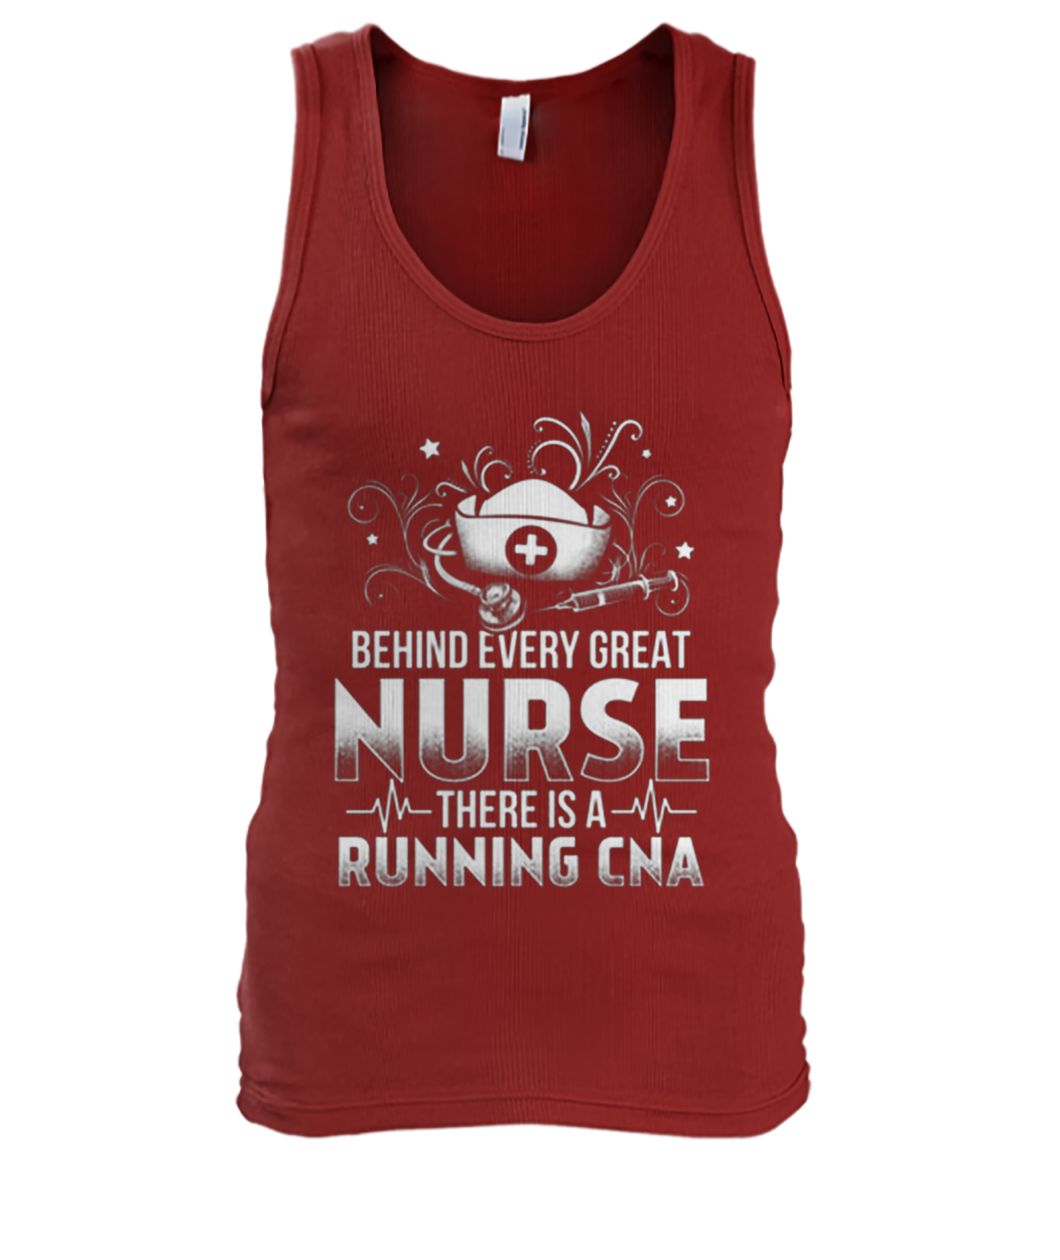 Behind every great nurse there is a running CNA men's tank top